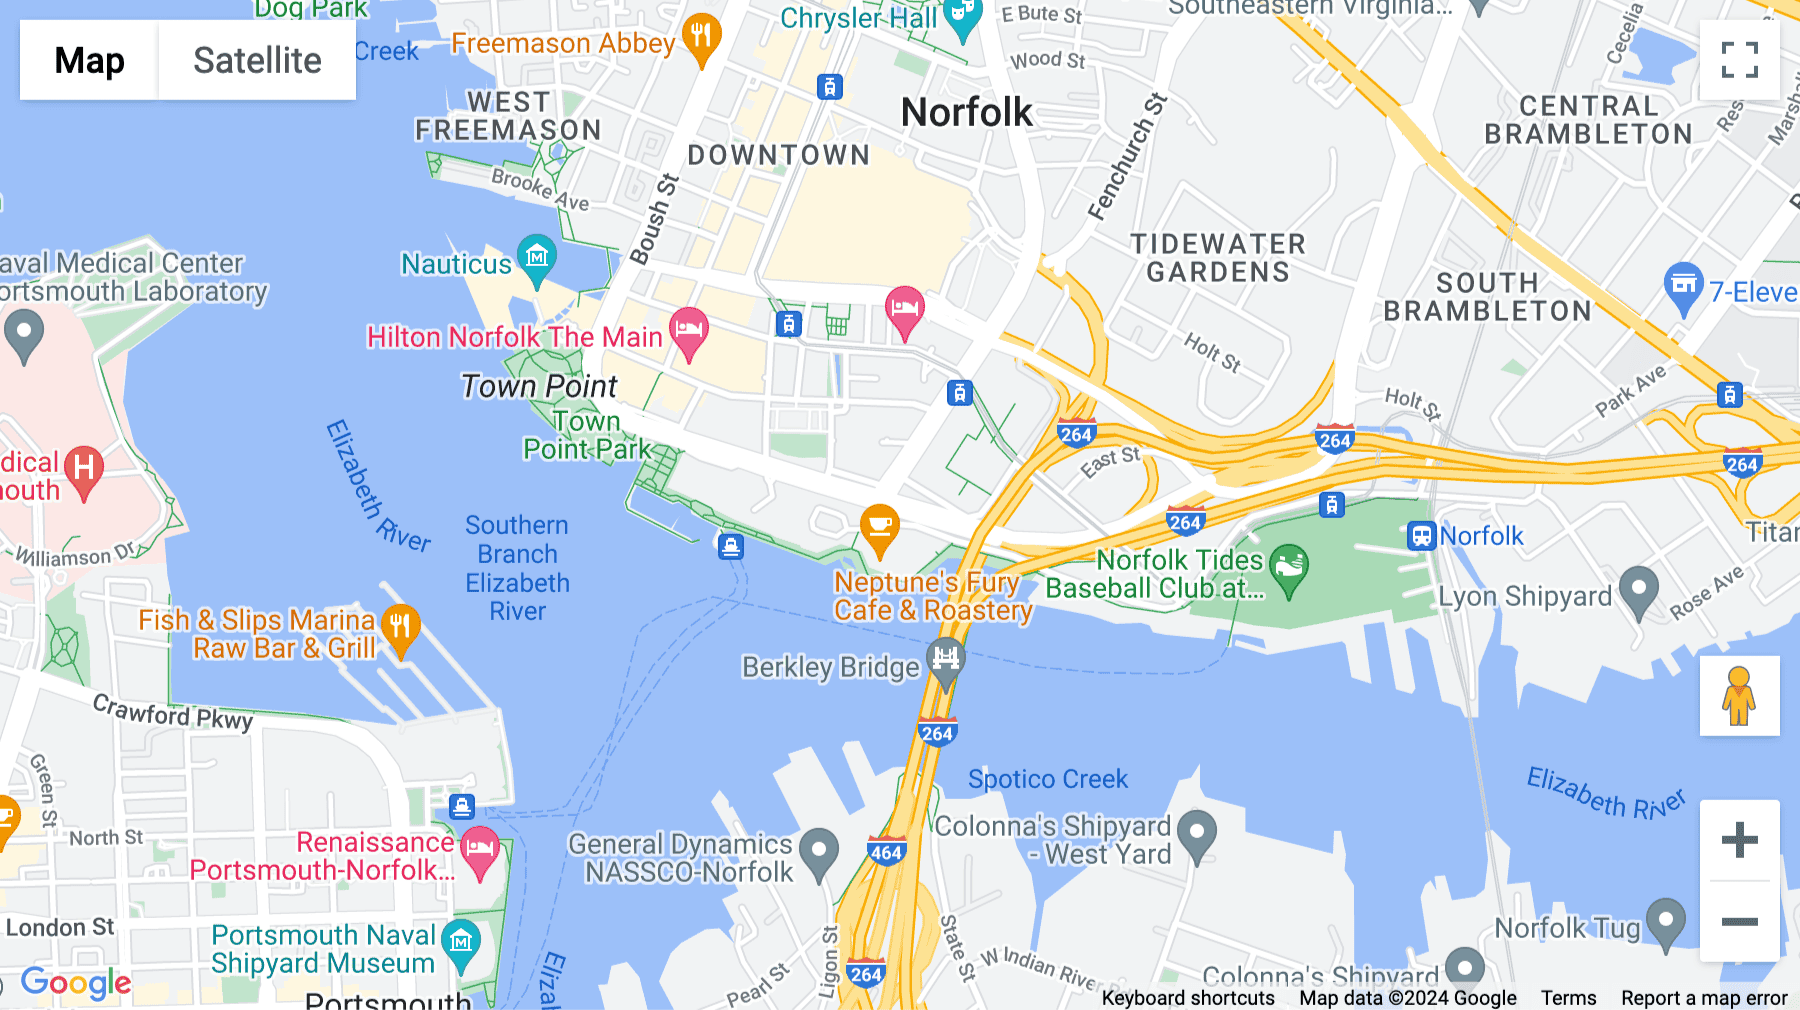 Click for interative map of 999 Waterside Drive, Suite 515, Norfolk, Virginia, Norfolk